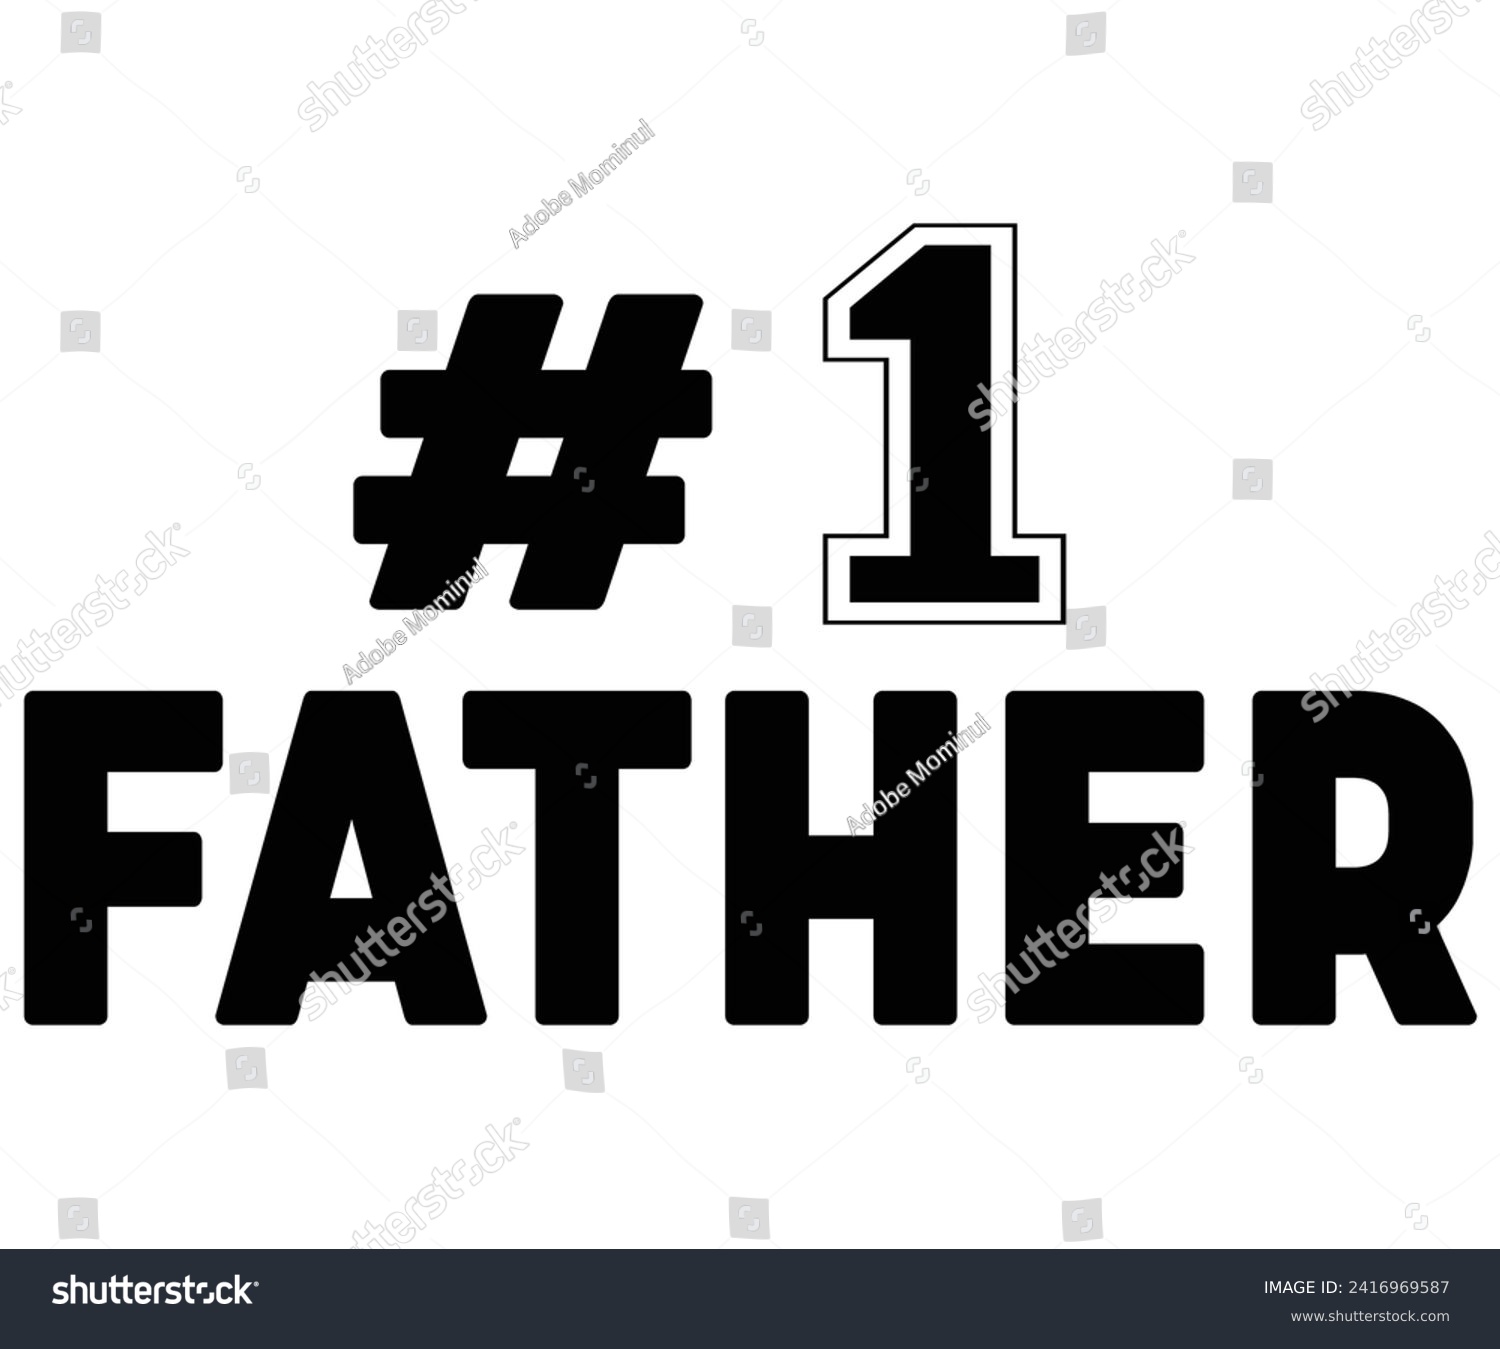 SVG of # 1 Father Svg,Father's Day Svg,Papa svg,Grandpa Svg,Father's Day Saying Qoutes,Dad Svg,Funny Father, Gift For Dad Svg,Daddy Svg,Family Svg,T shirt Design,Svg Cut File,Typography svg